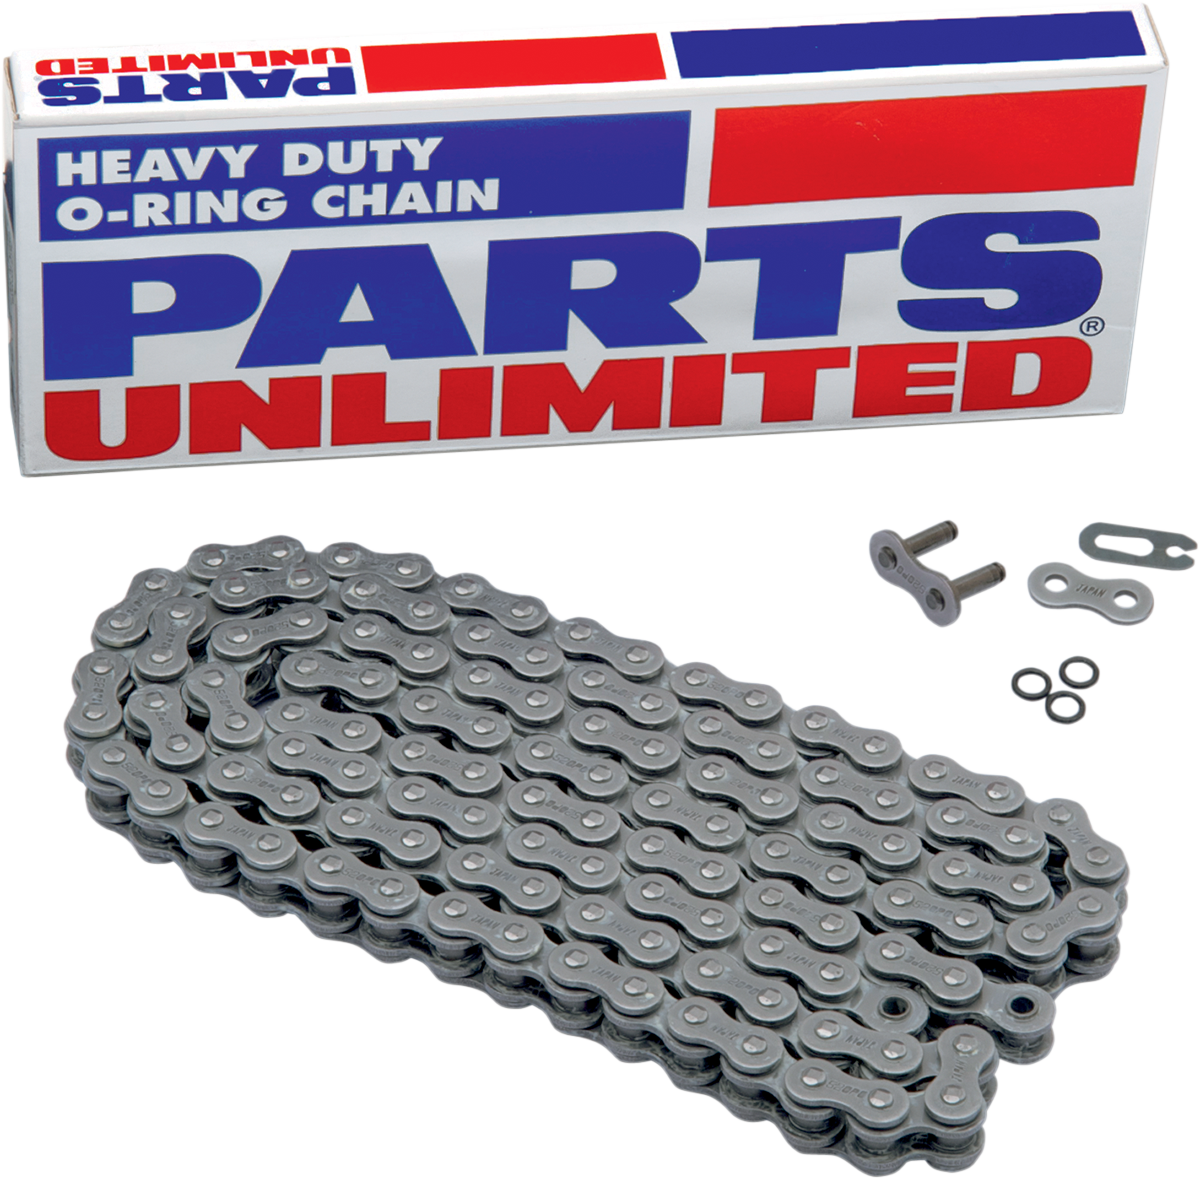 PARTS UNLIMITED-CHAIN MOTORCYCLE CHAIN CHAIN PU 530 O-RNG X 102L